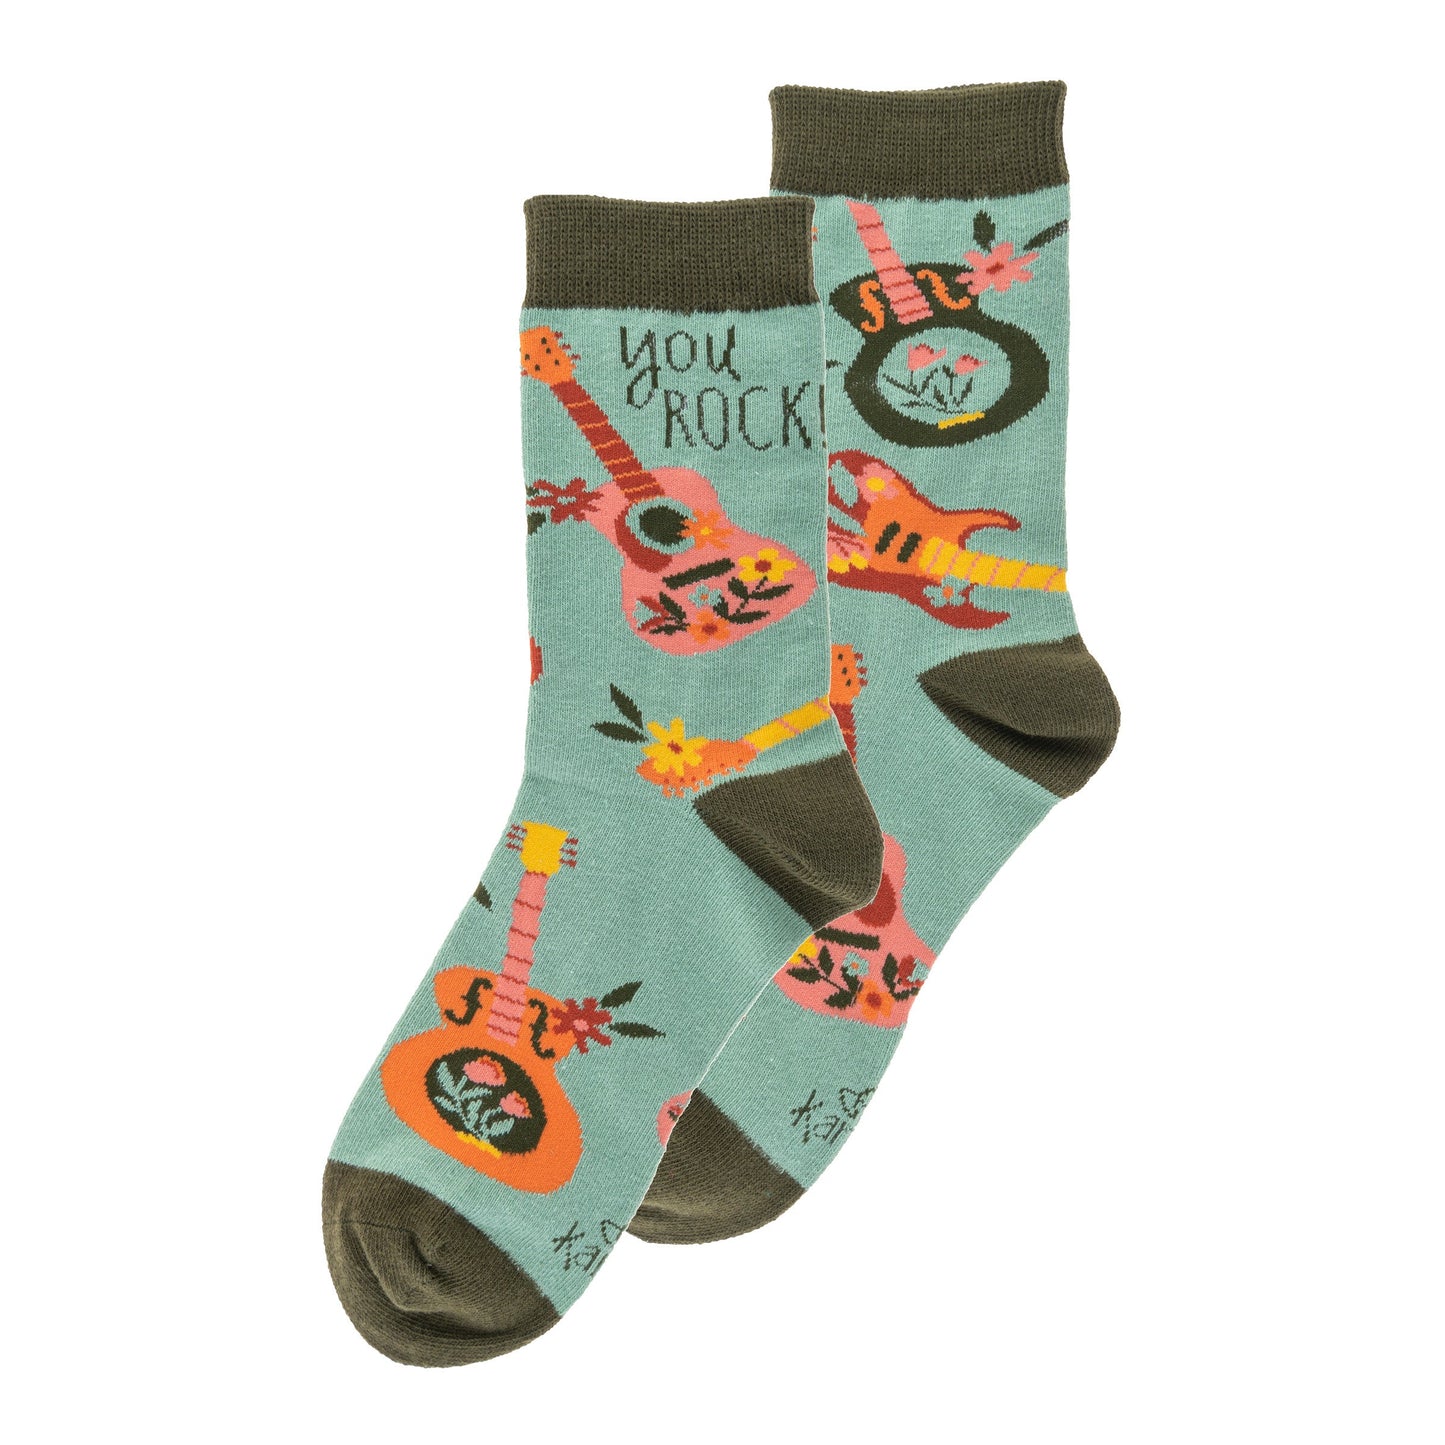 green socks with guitar pattern and "you rock" on them.